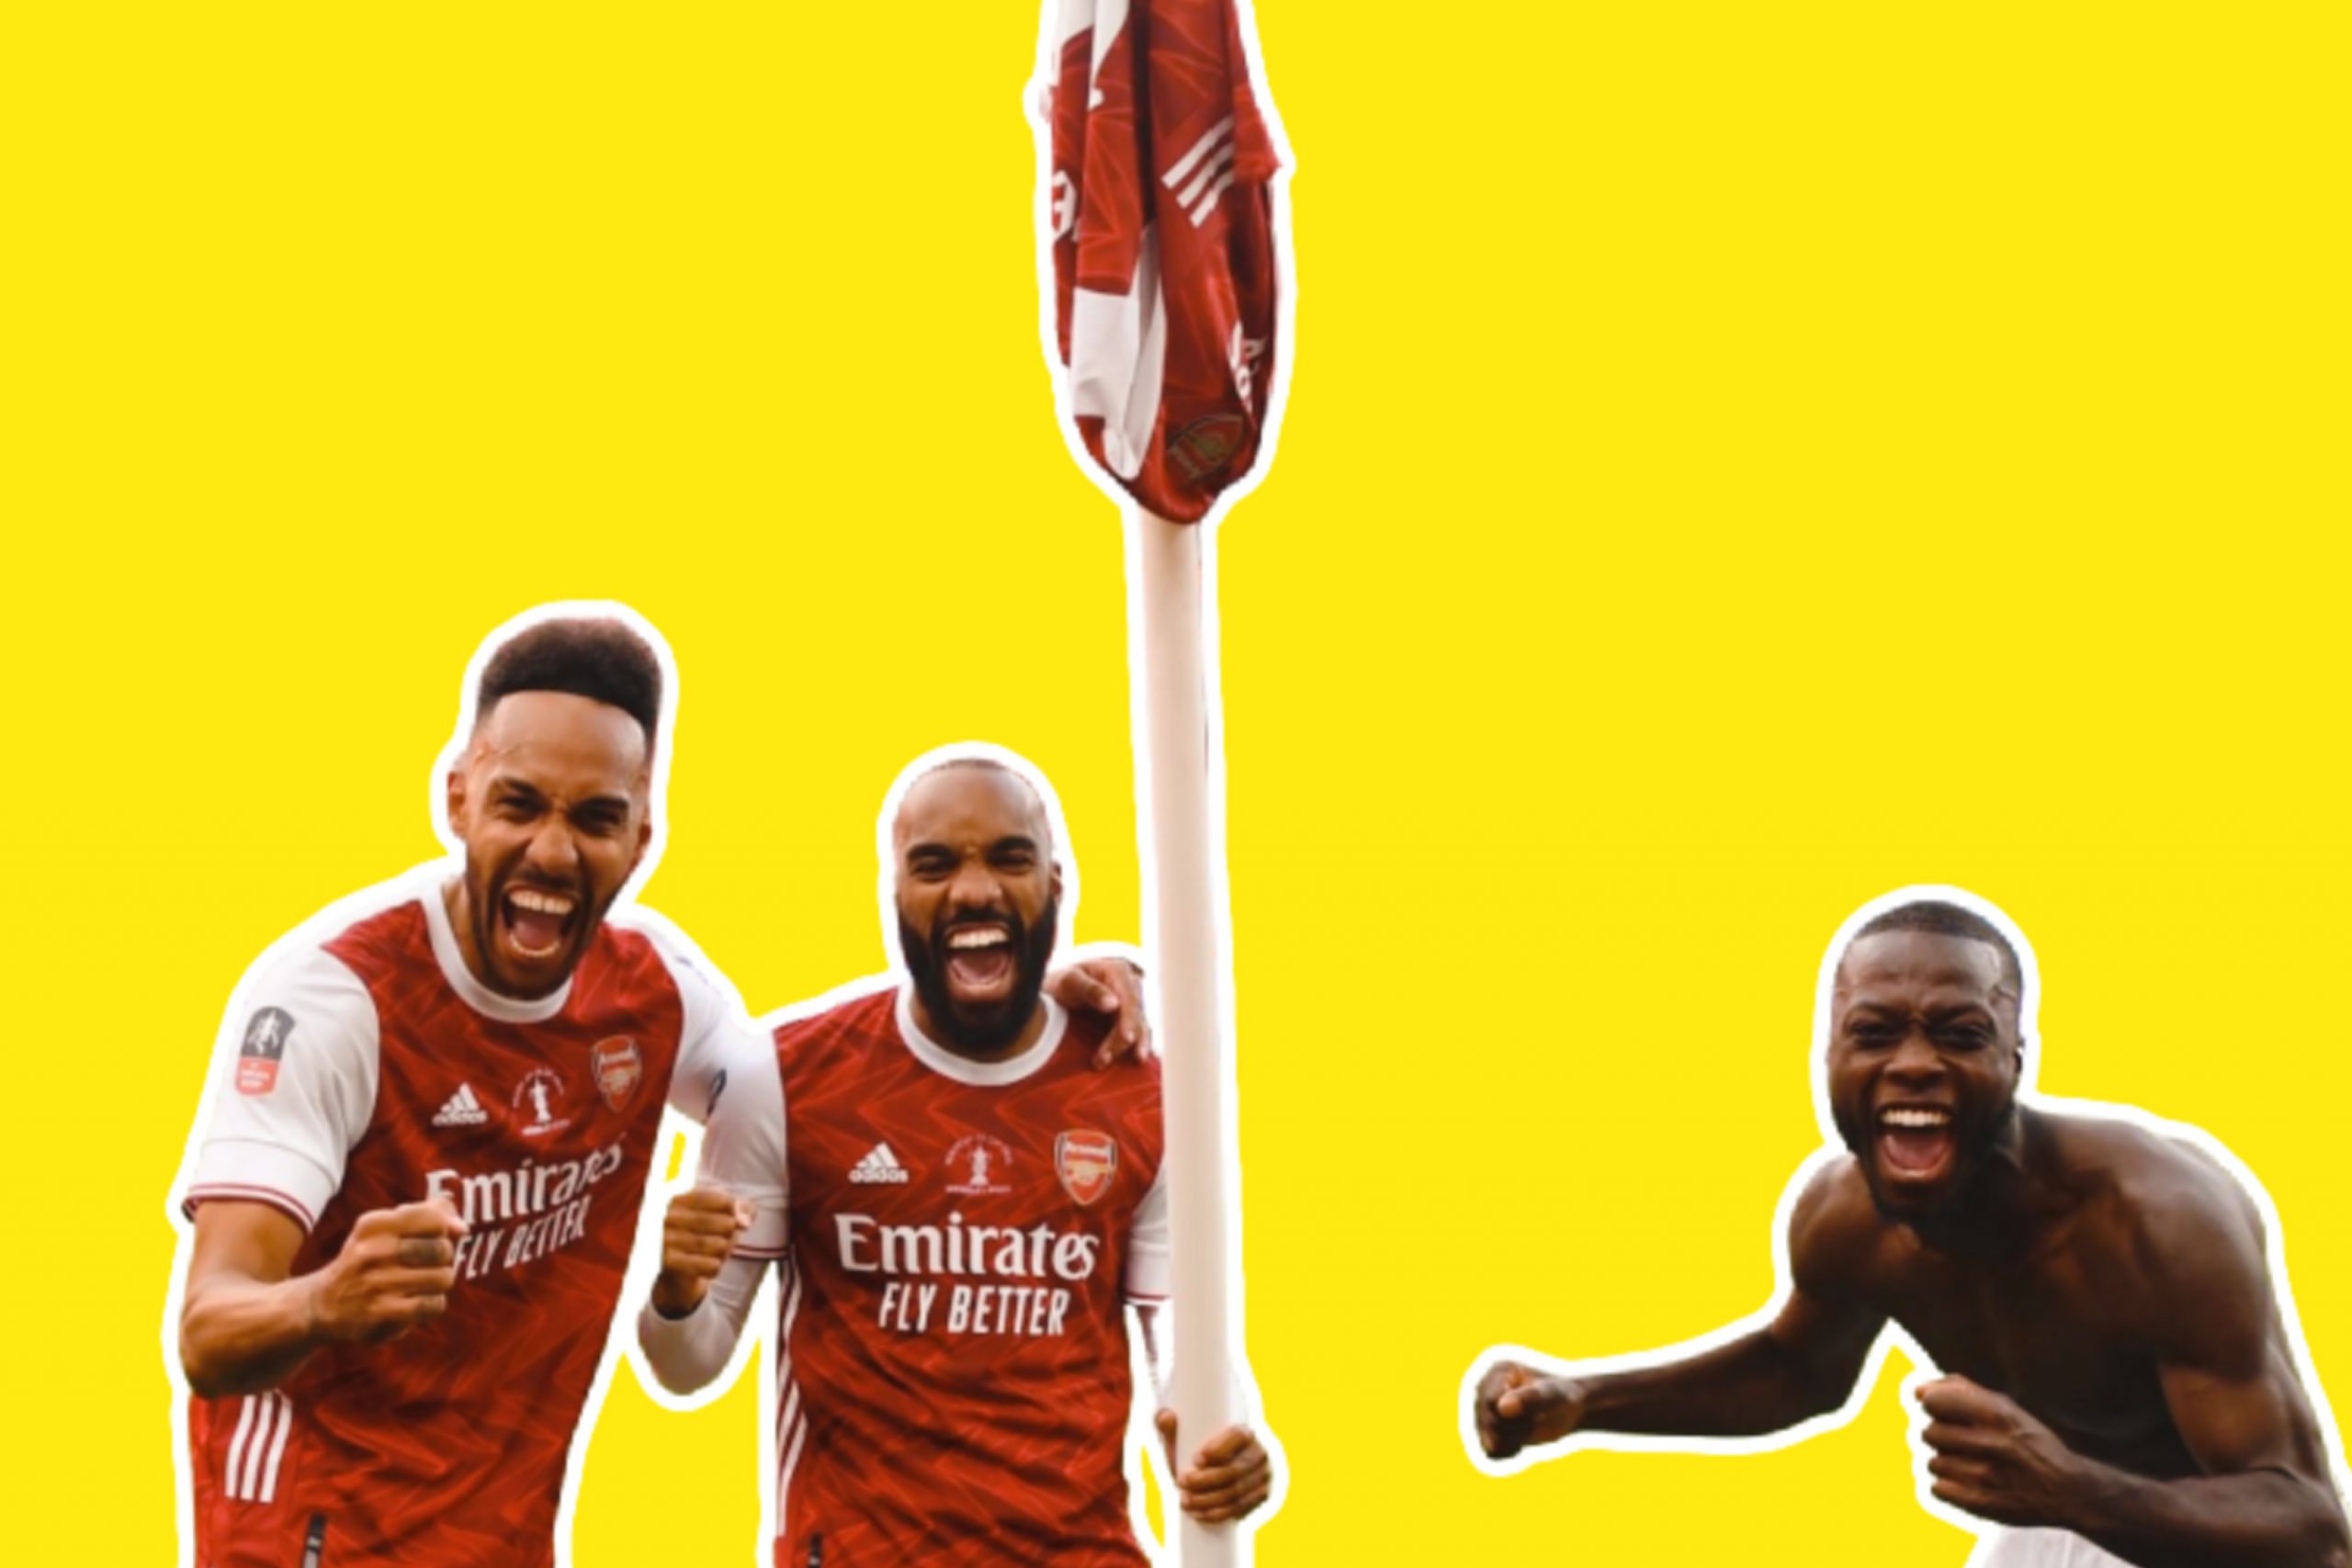 Aubameyang, Lacazette and Nicolas Pep celebrate with a corner flag after winning the FA Cup final against Chelsea